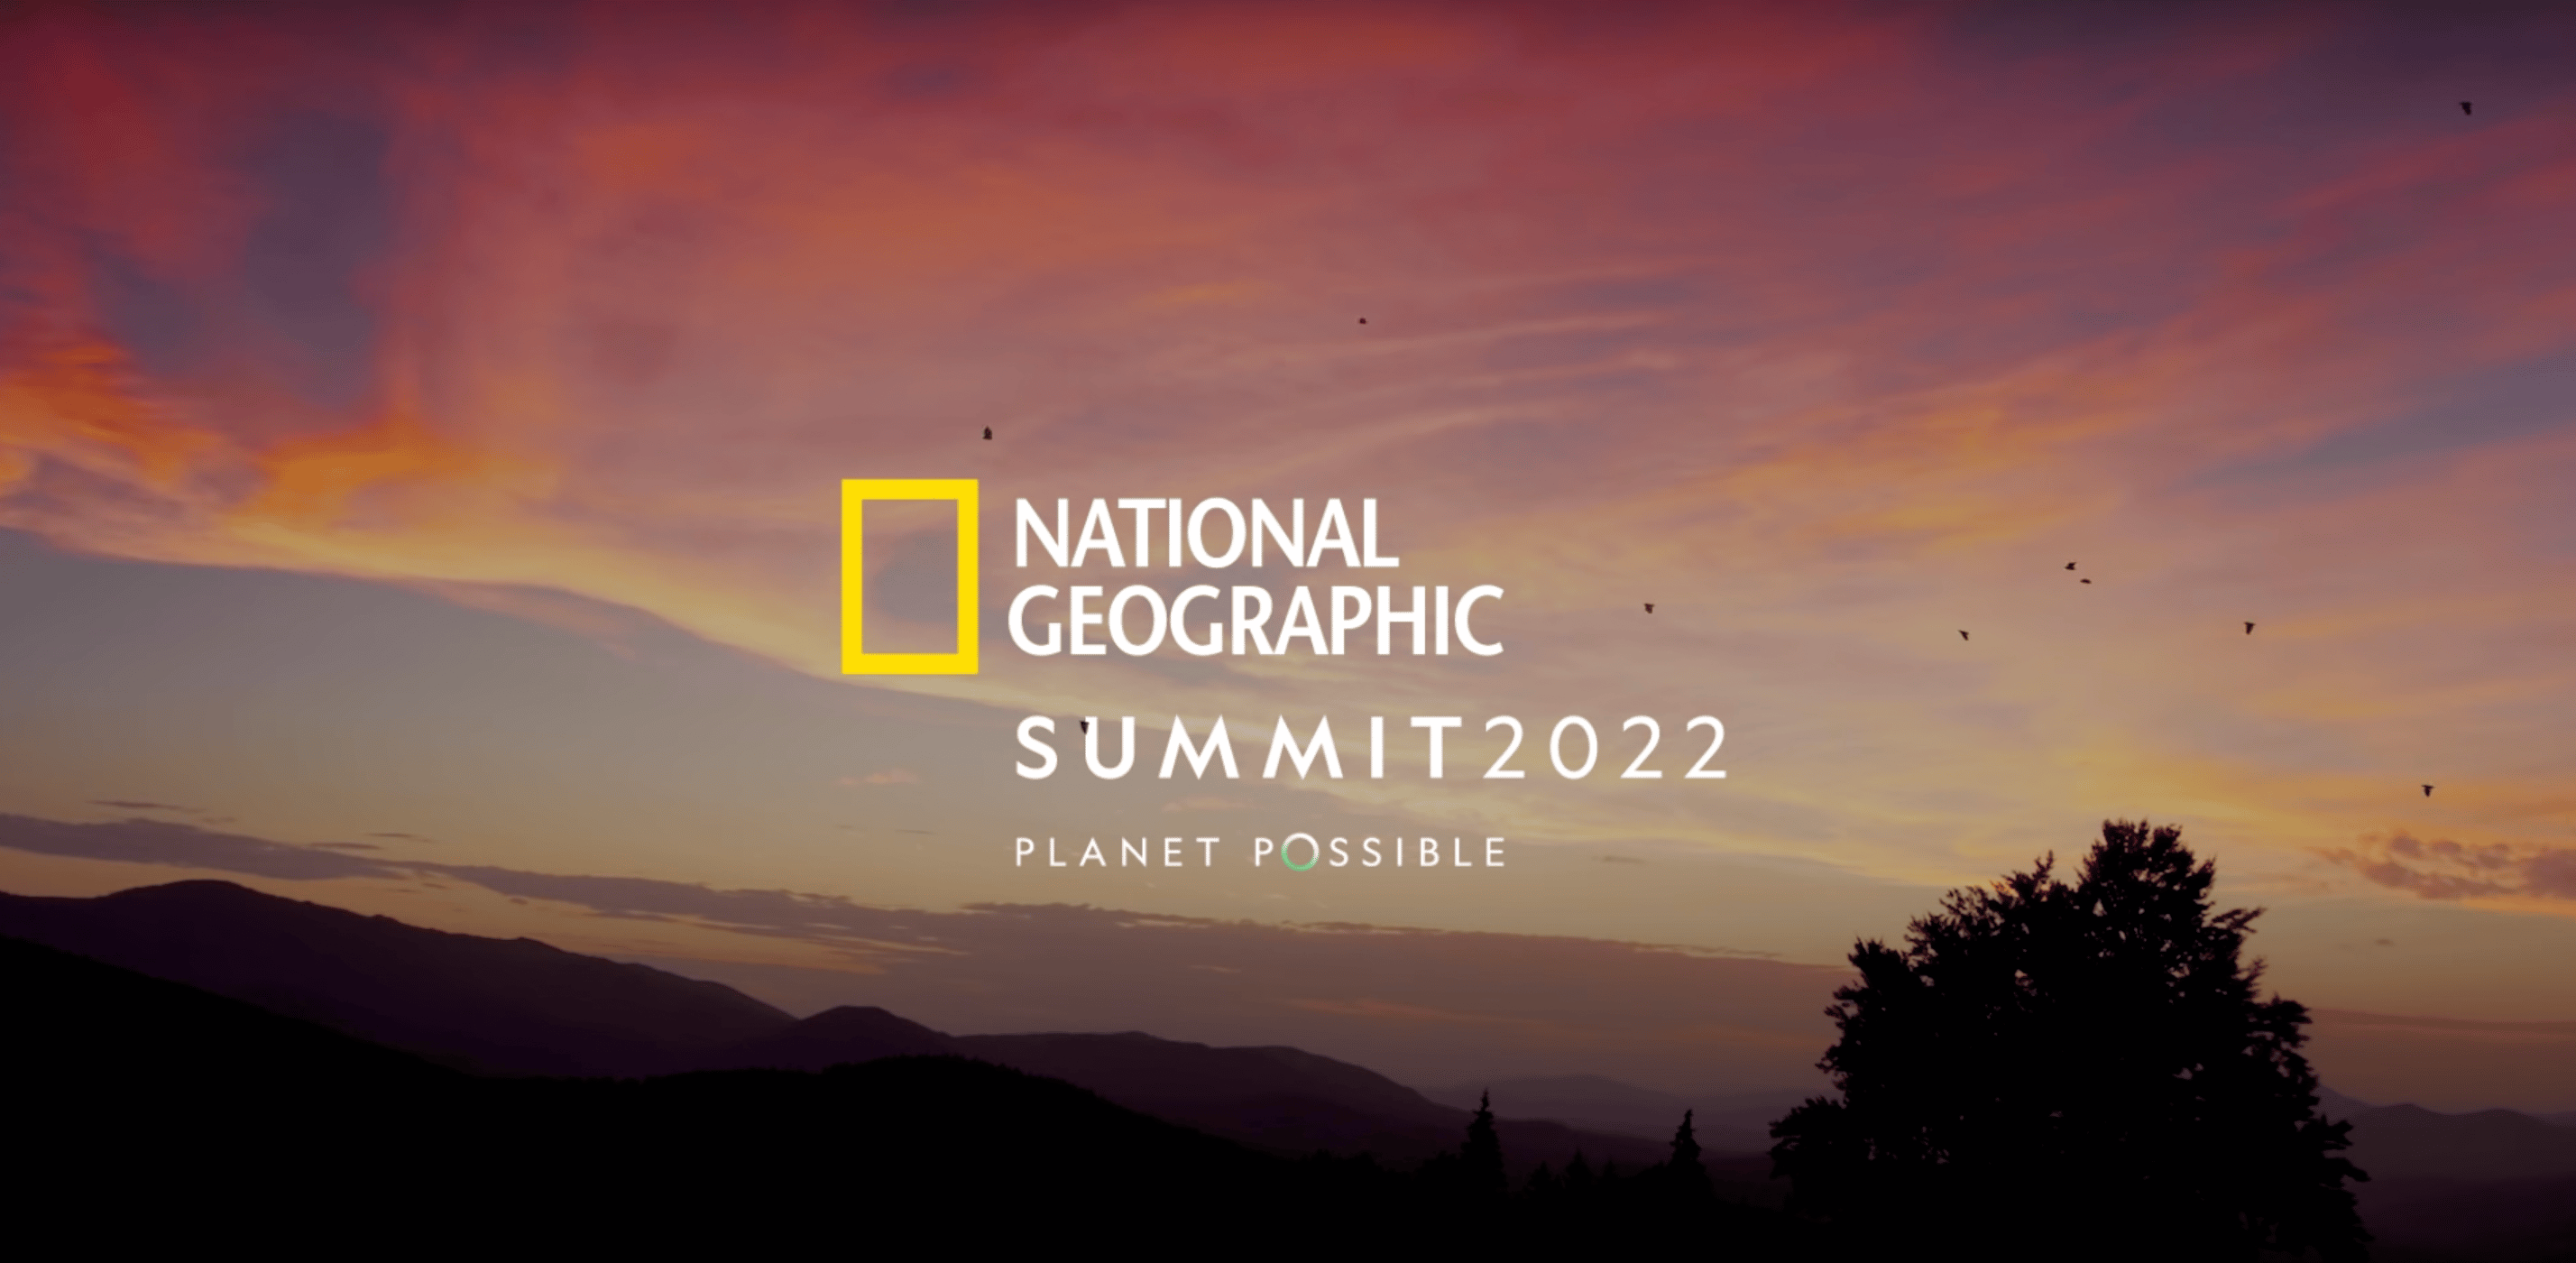 National Geographic Summit 2022